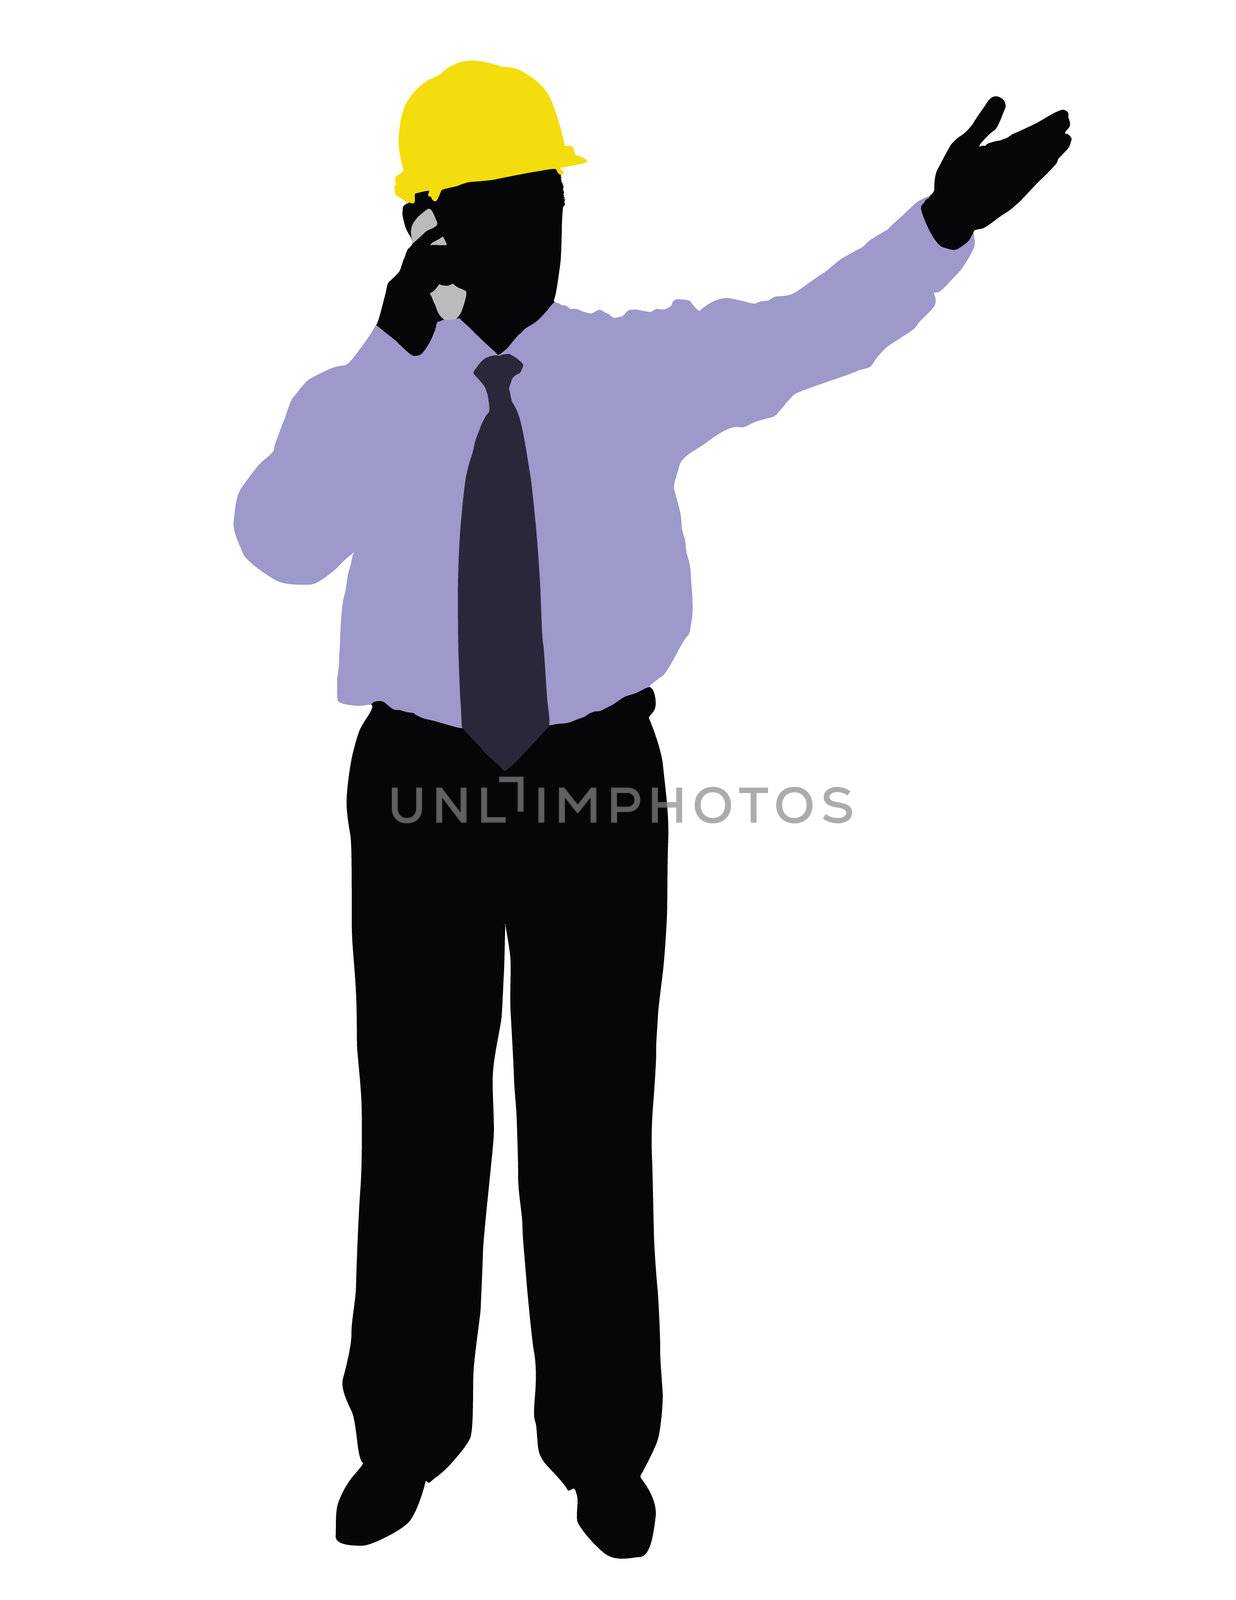 black silhouette of man in the blue shirt isolated on the white background